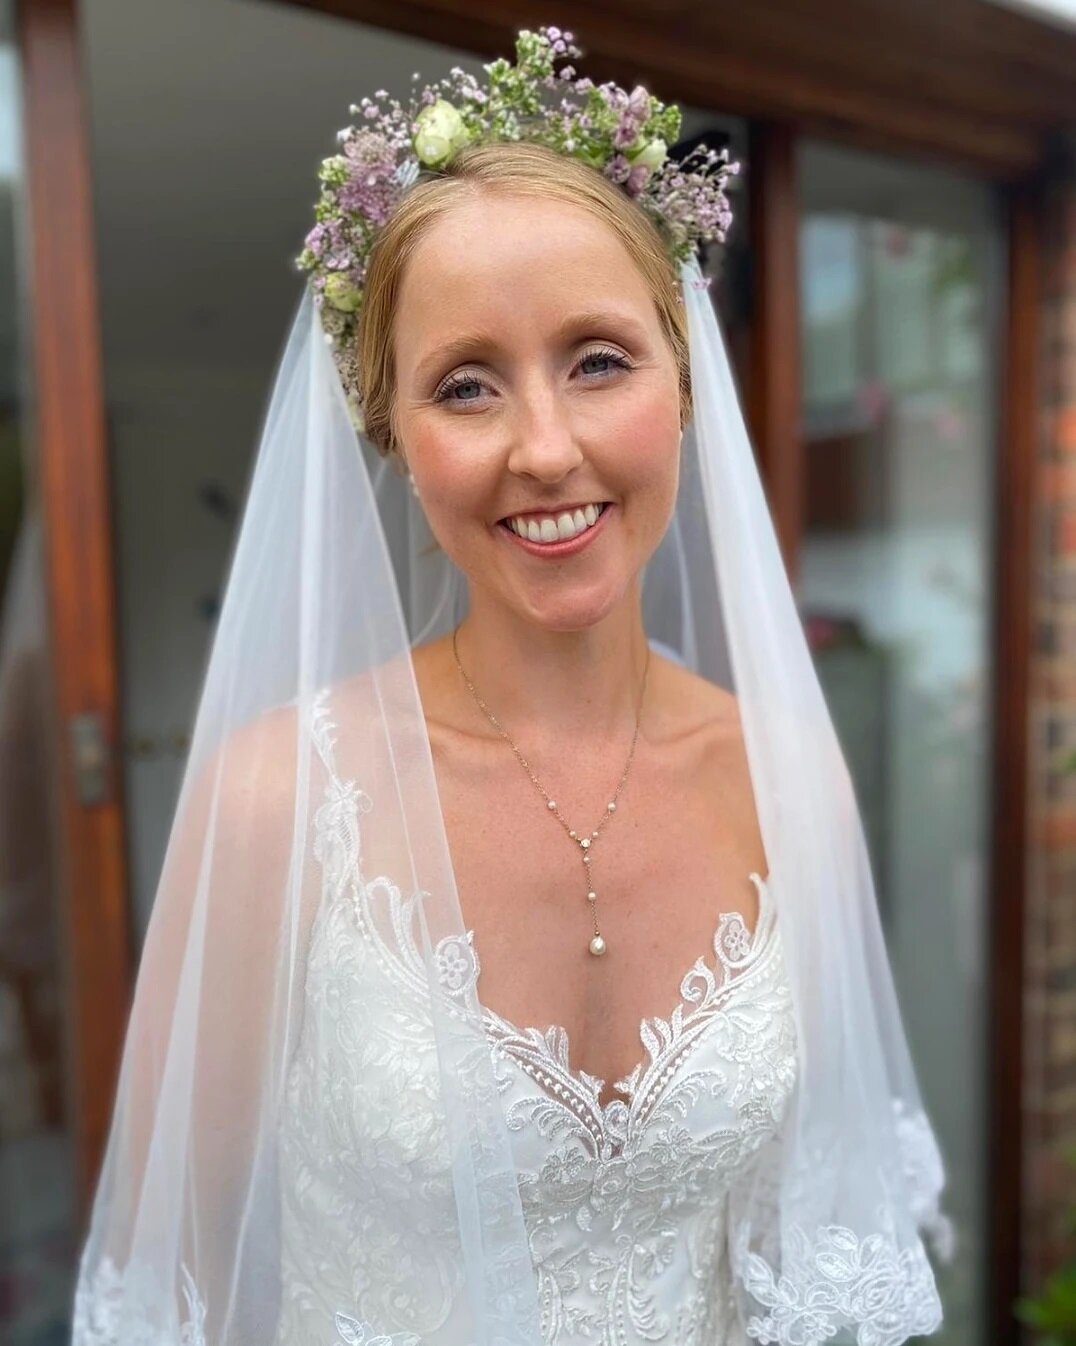 Katie 🌸 a beautiful bride on Saturday, we loved Katie's stunning dress, veil &amp; flower crown 🌷 make up by Claire 💕 xx